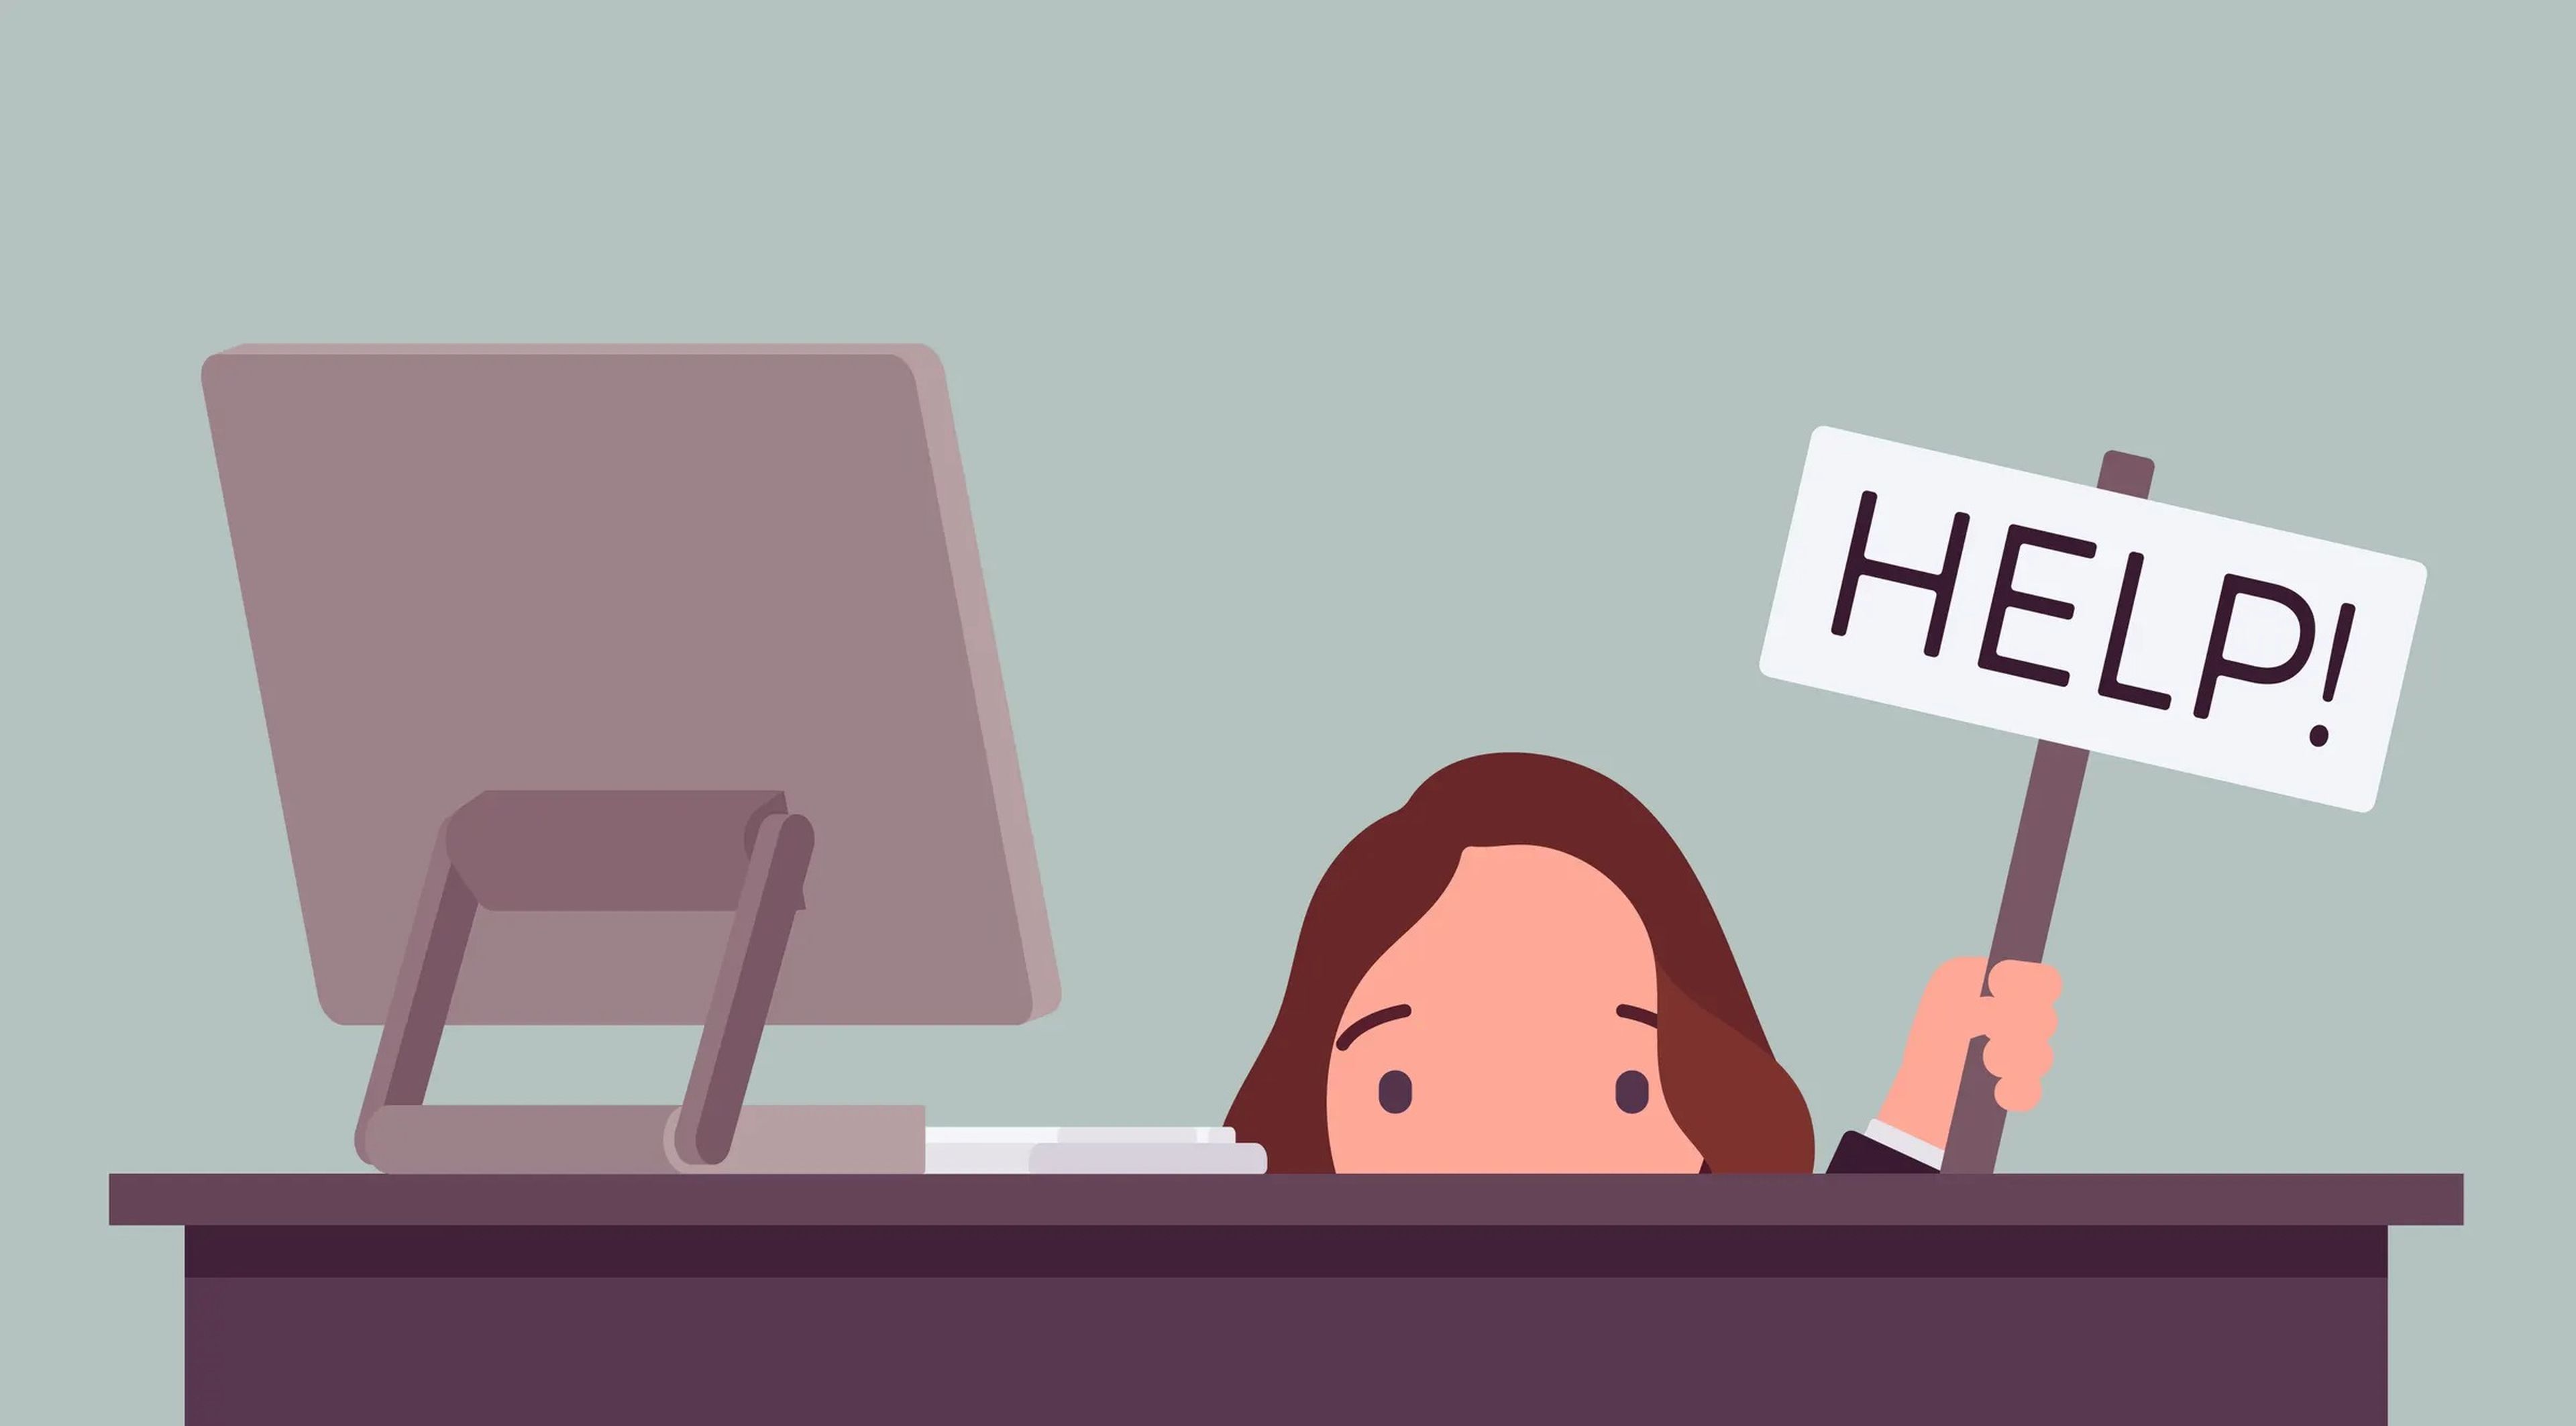 Illustration of a worker hiding behind a desk, holding up a sign that says "HELP."